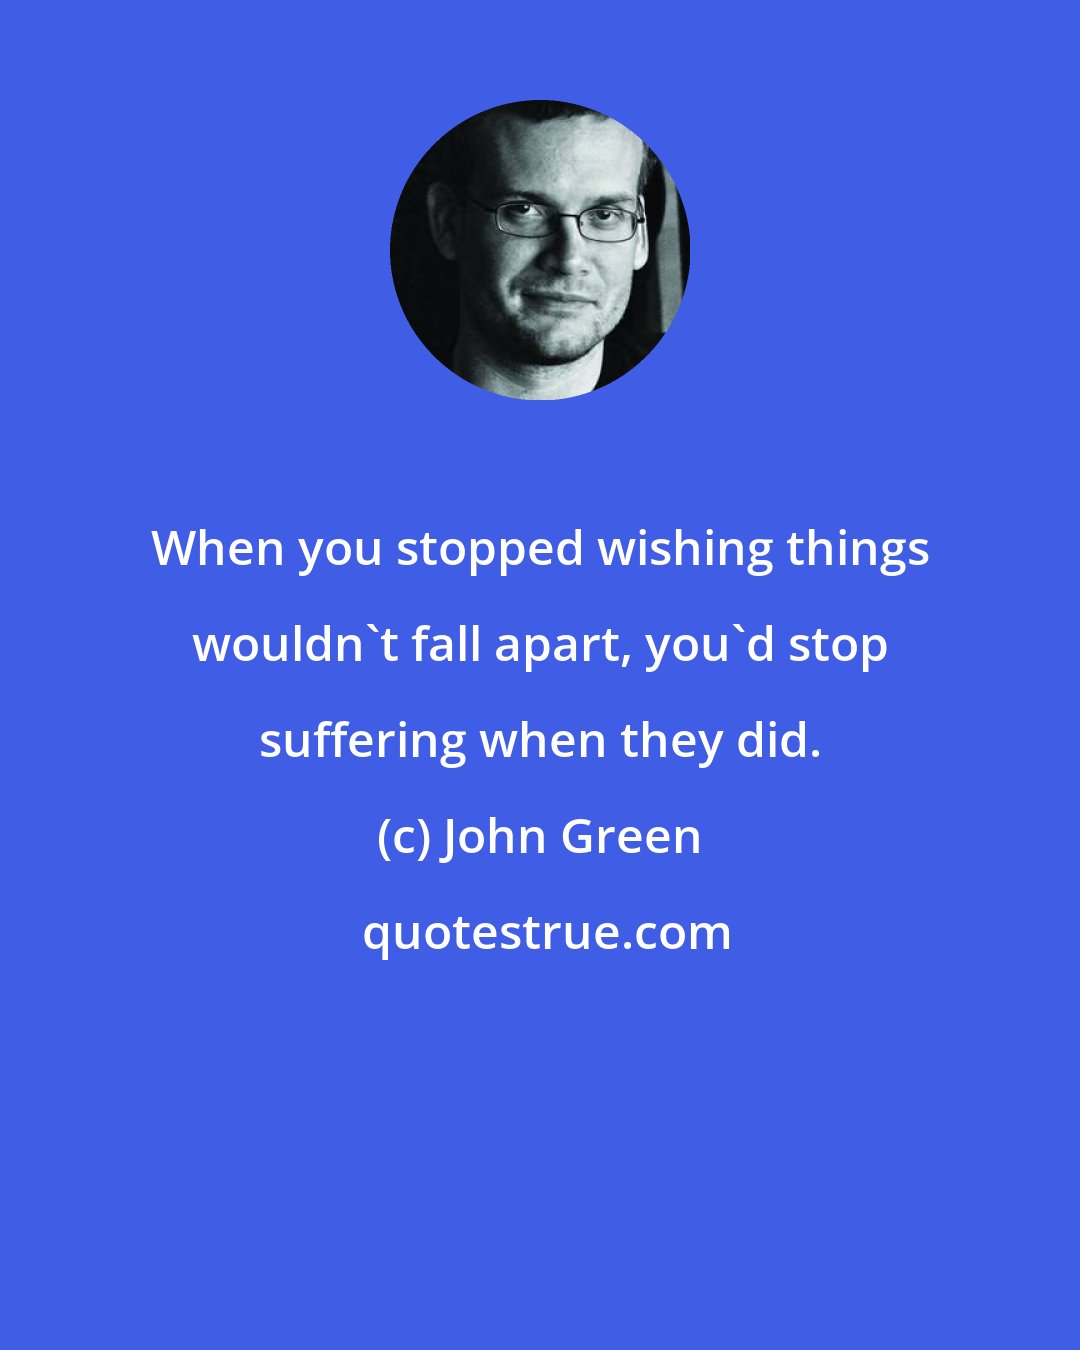 John Green: When you stopped wishing things wouldn't fall apart, you'd stop suffering when they did.